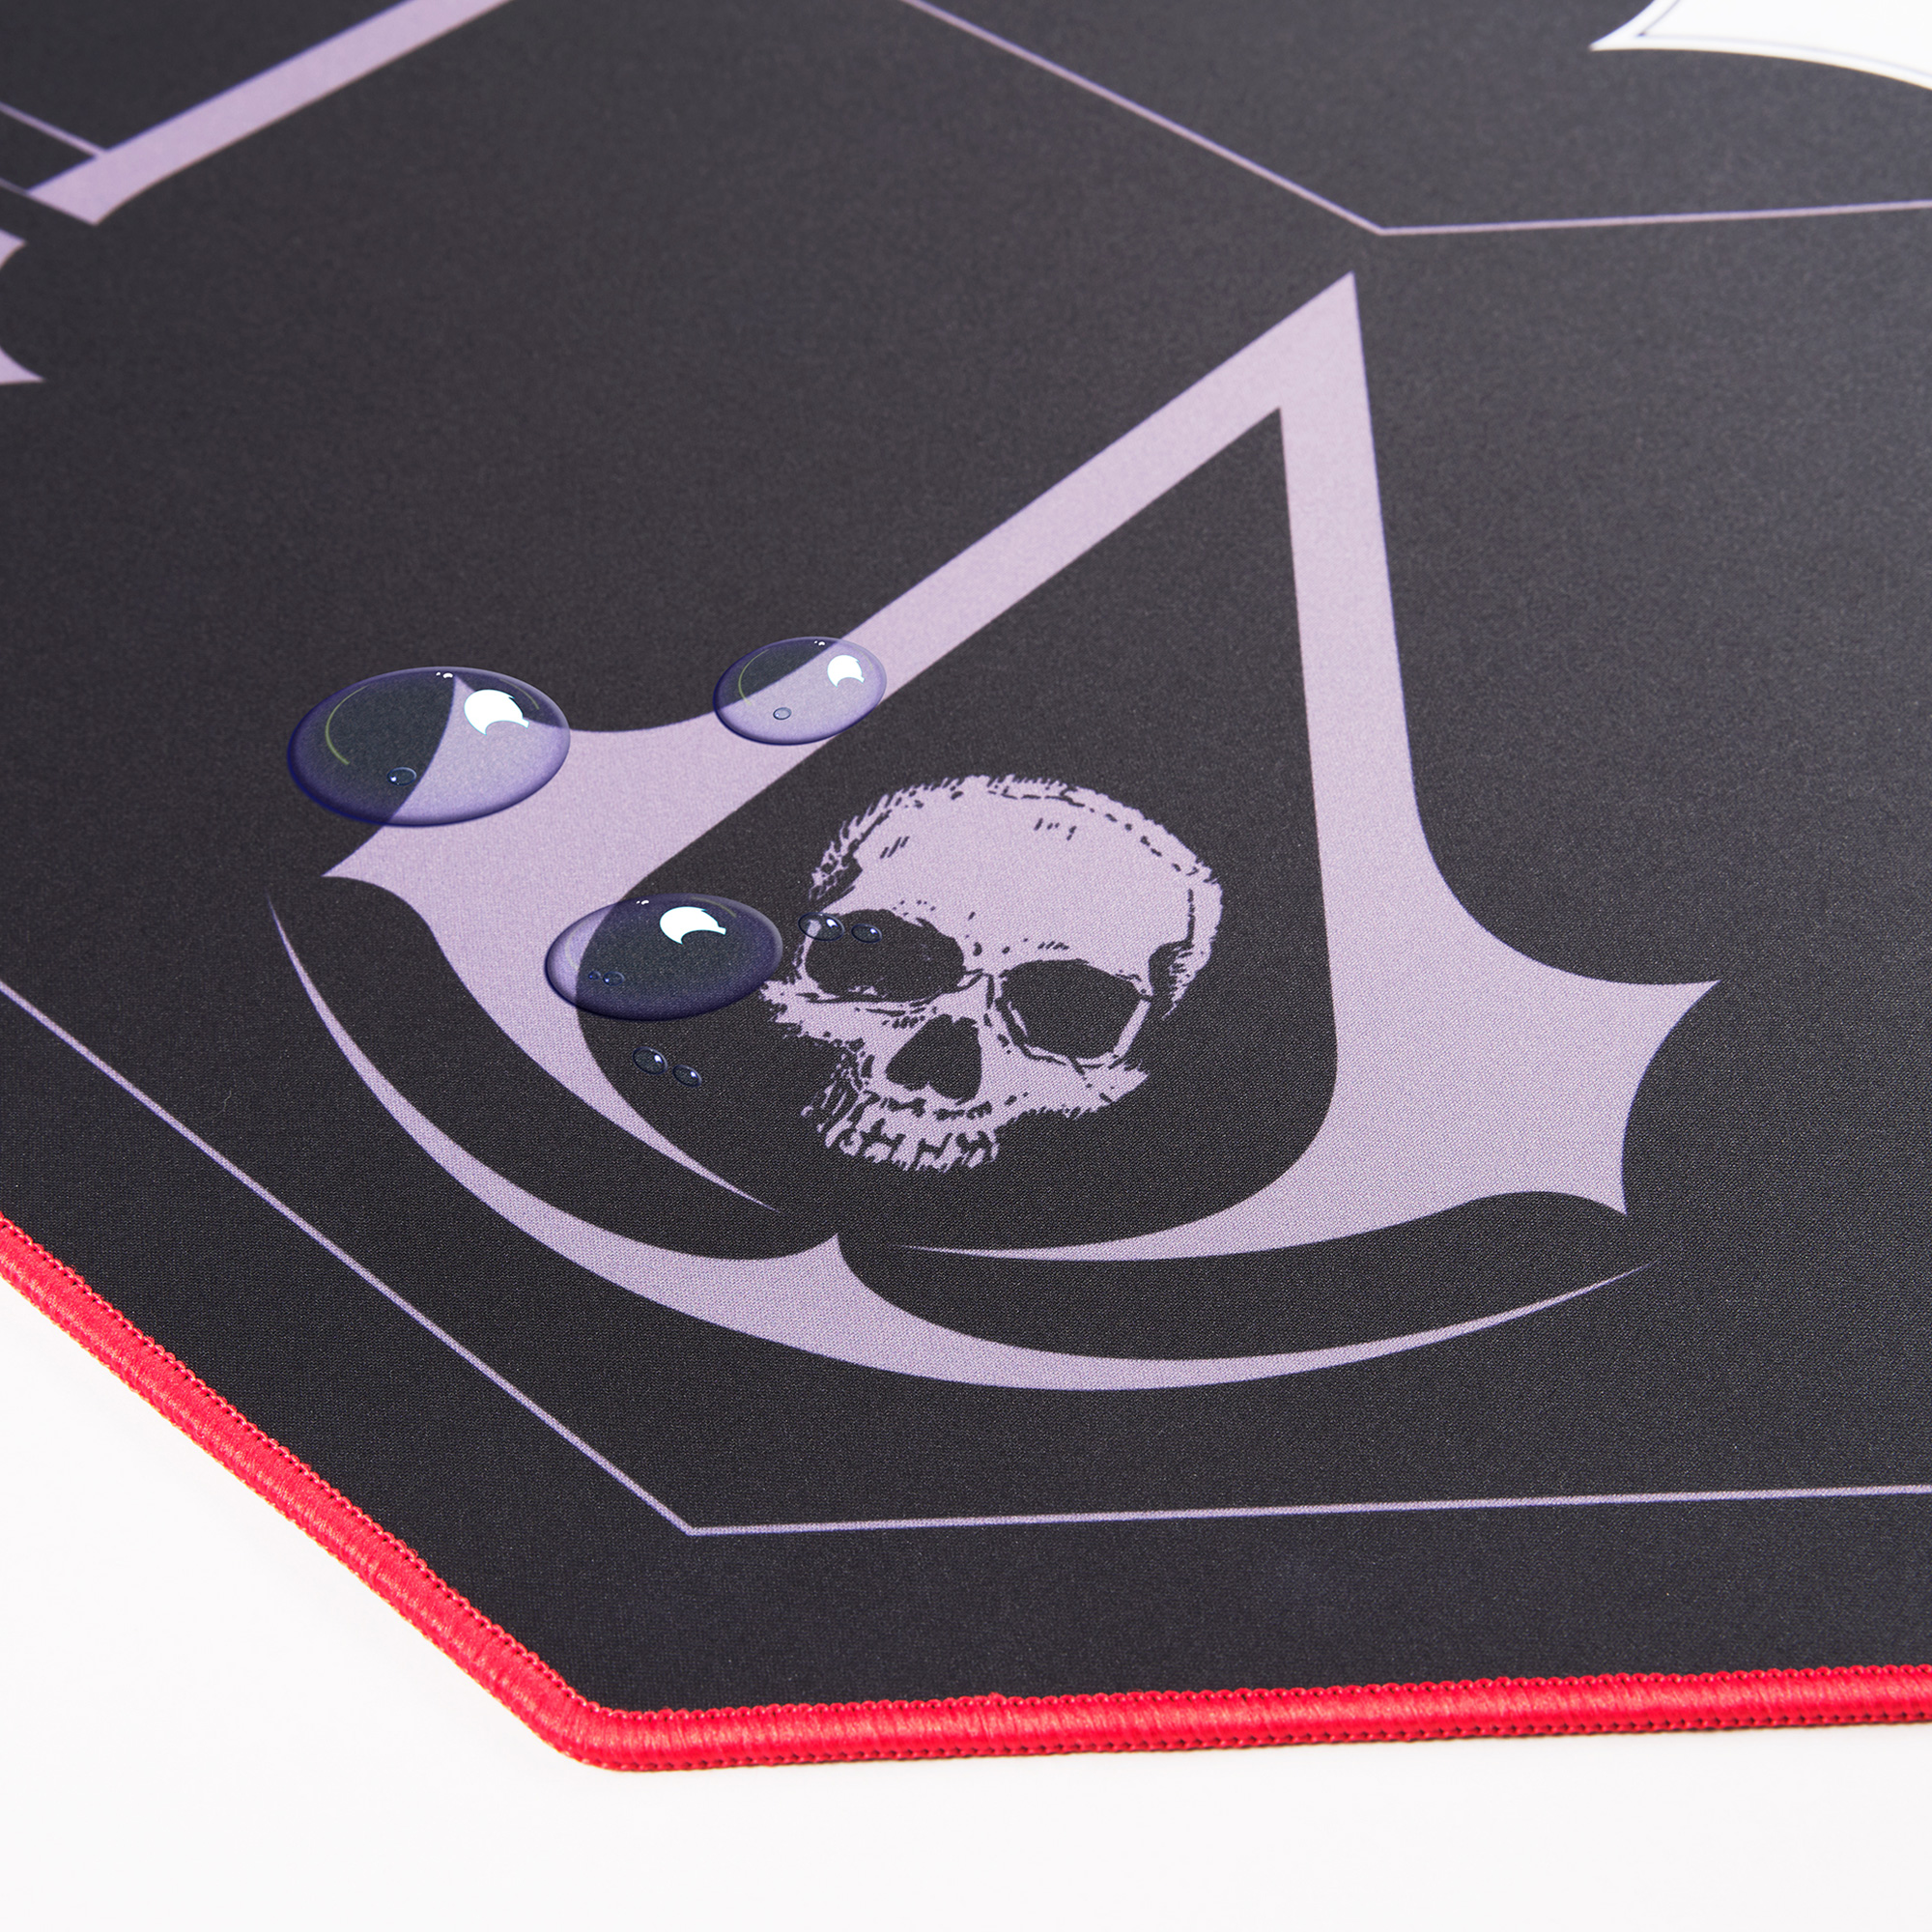 Assassin's Creed gaming floor mat | Subsonic